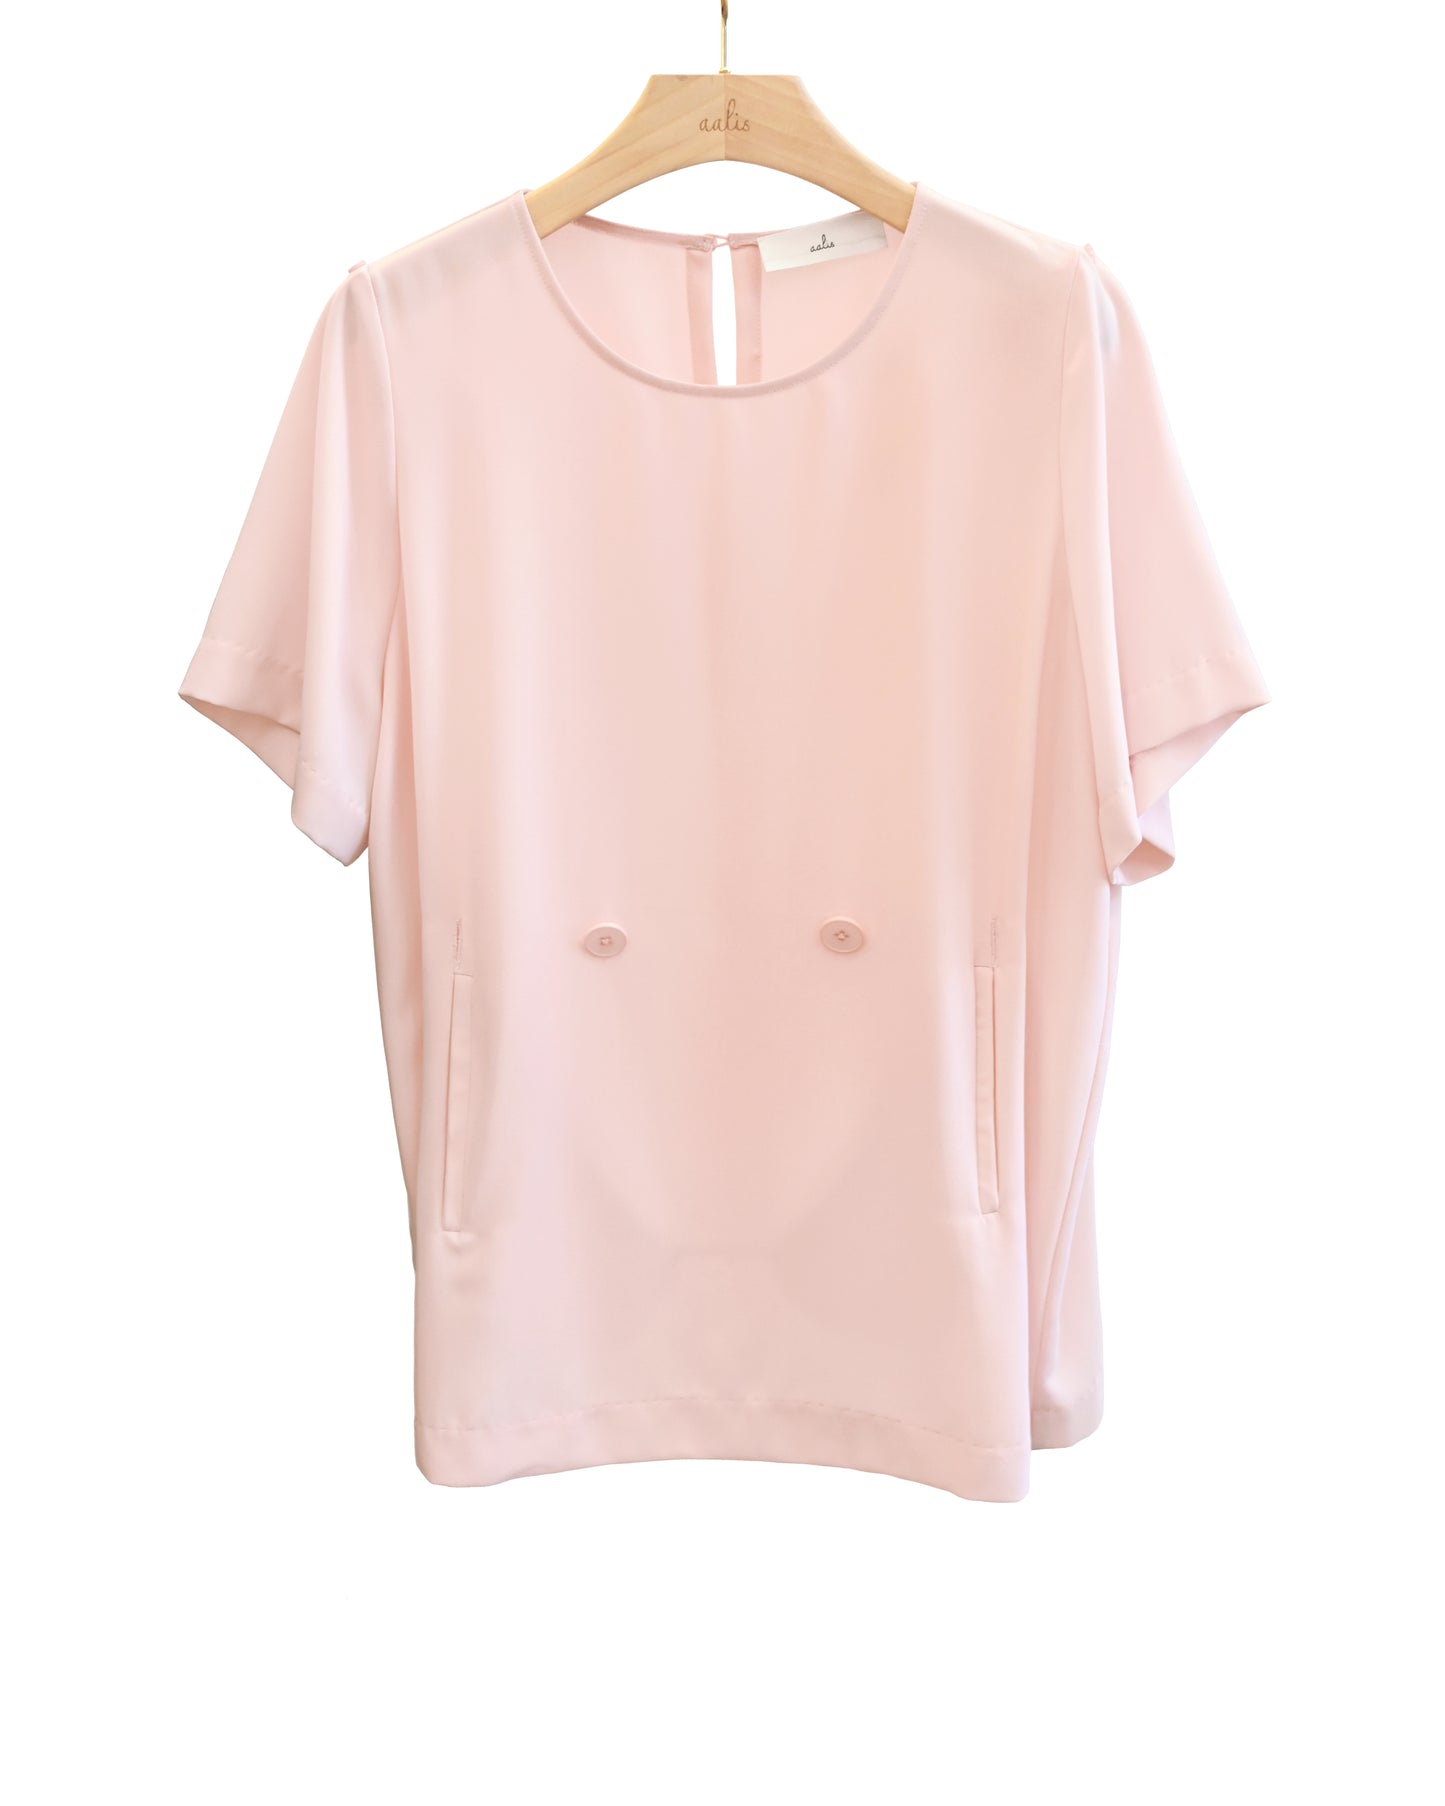 aalis YOKI Woven Tee with buttons detail (Pink)